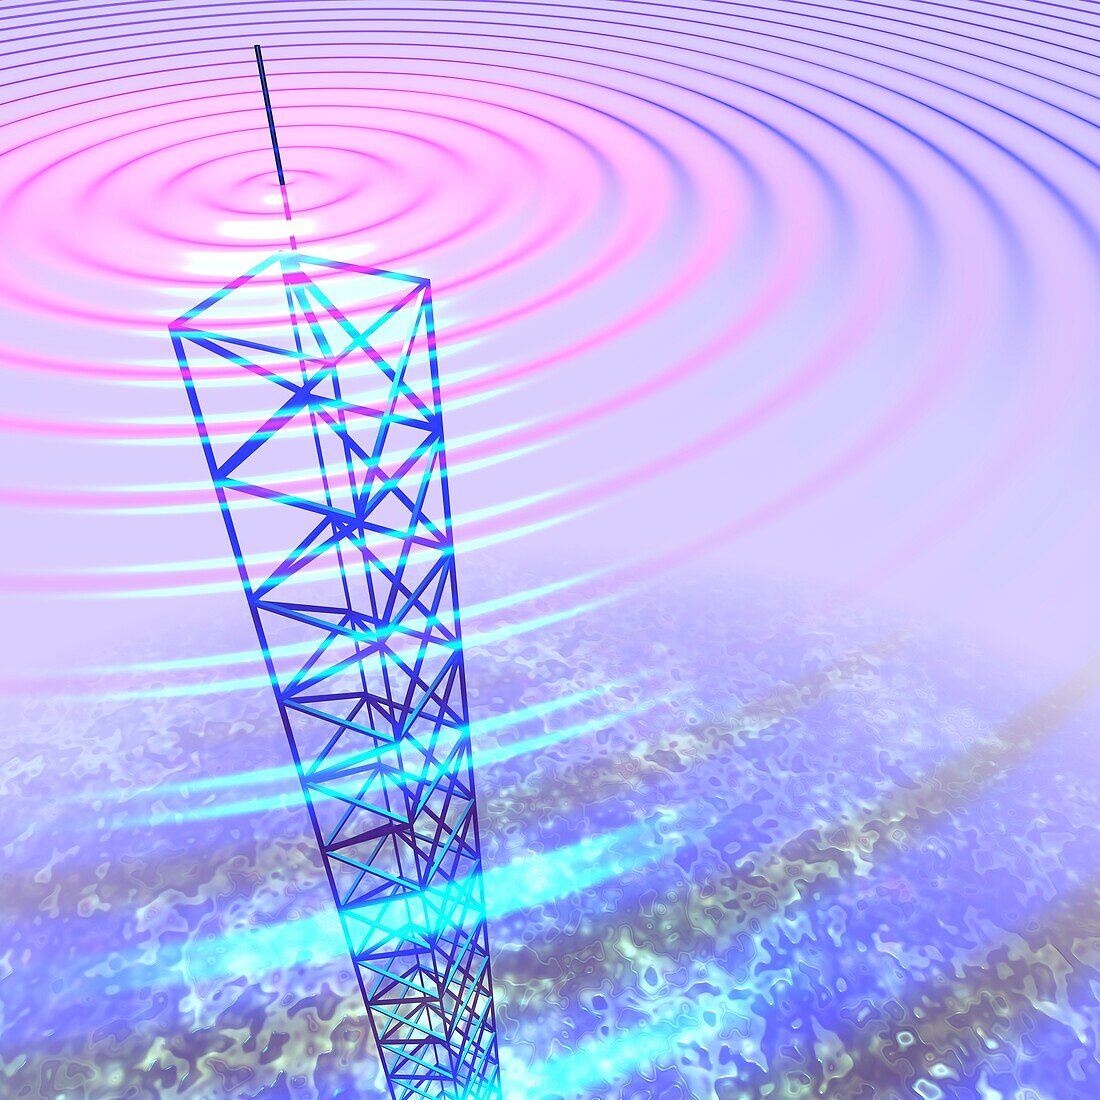 Radio waves and transmission tower